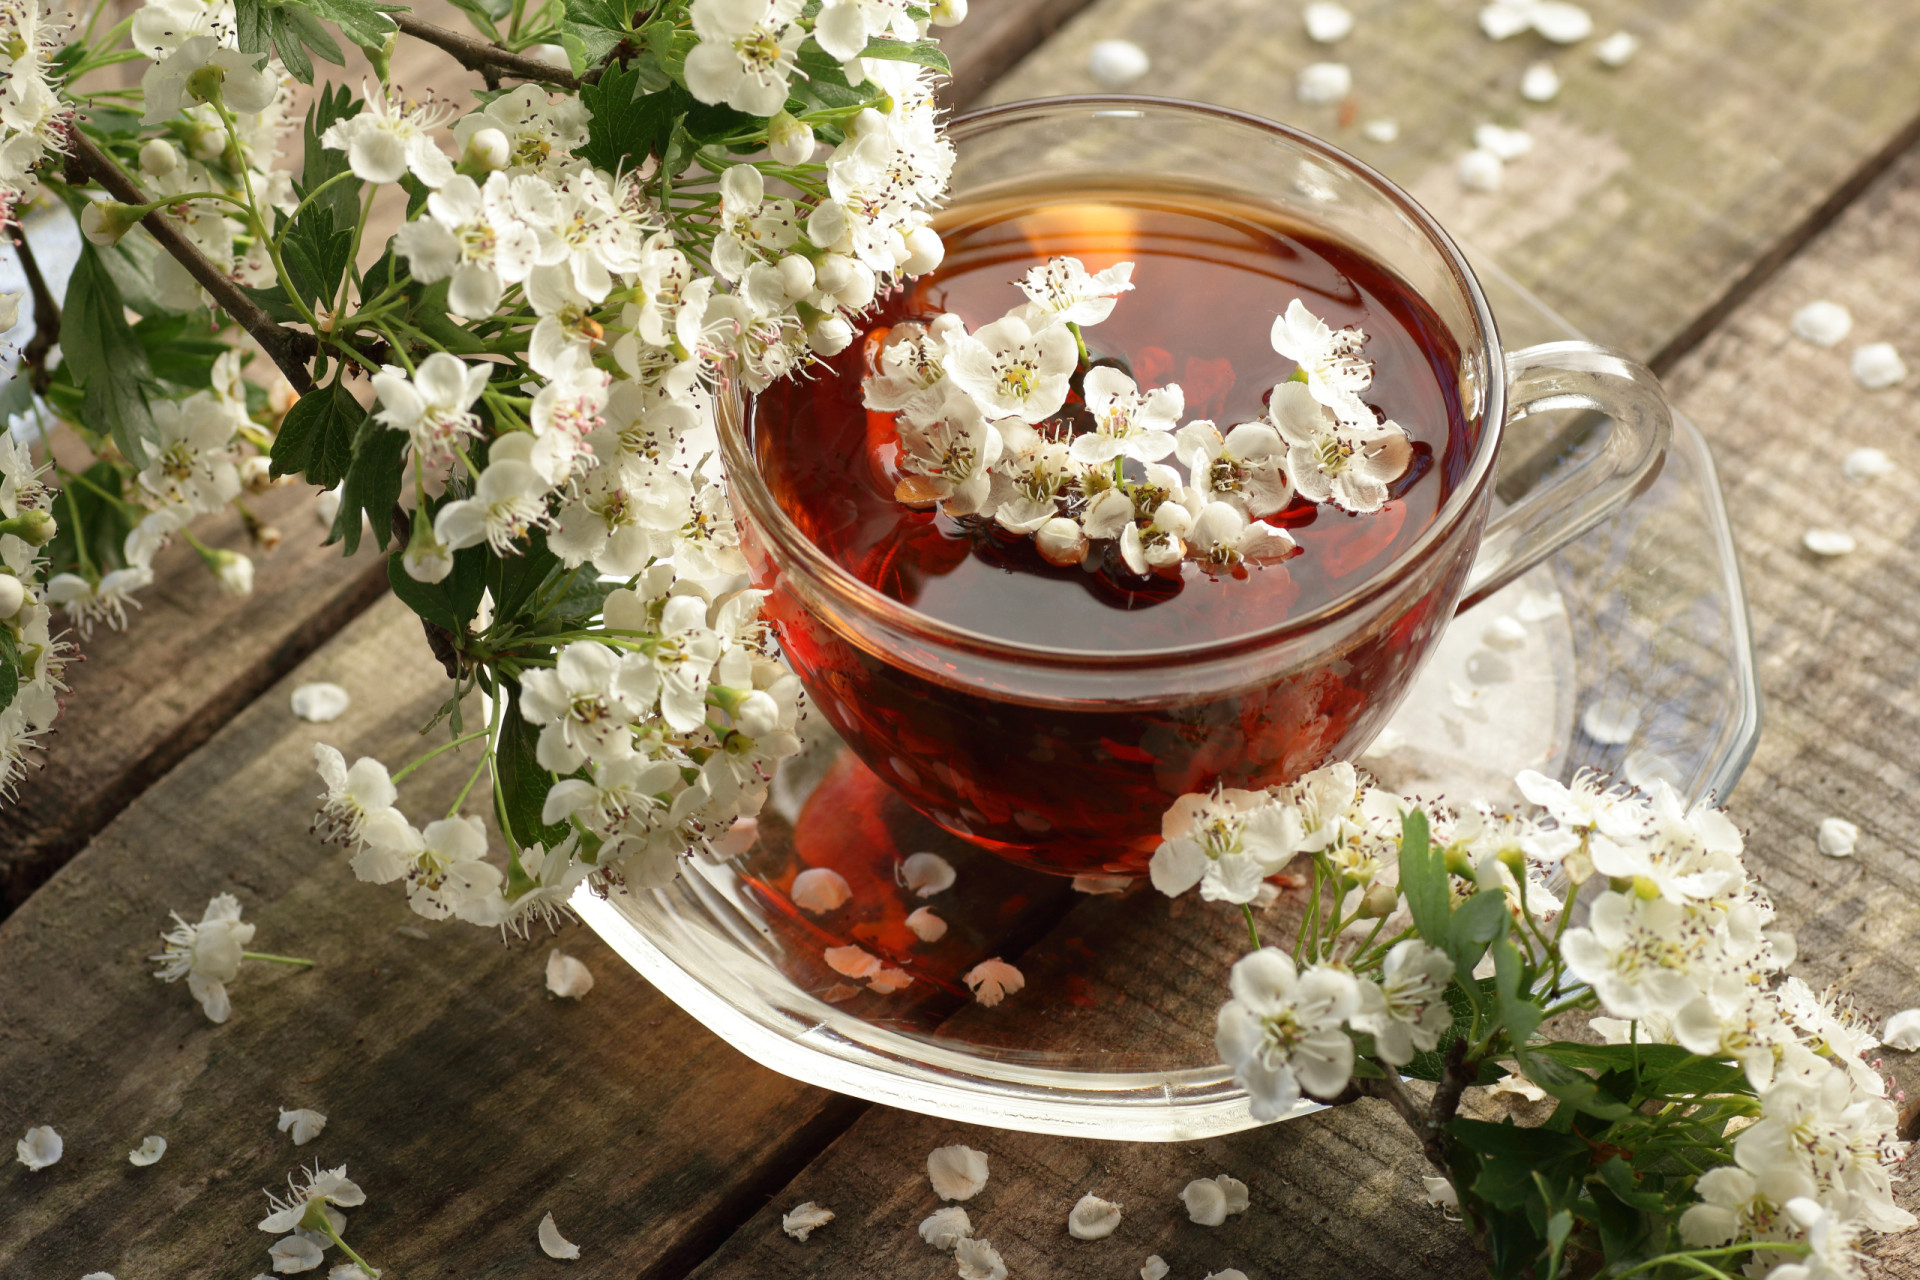 <p>Clinical studies have found that hawthorn may increase the effectiveness of digoxin.</p><p><a href="https://www.msn.com/en-us/community/channel/vid-7xx8mnucu55yw63we9va2gwr7uihbxwc68fxqp25x6tg4ftibpra?cvid=94631541bc0f4f89bfd59158d696ad7e">Follow us and access great exclusive content every day</a></p>